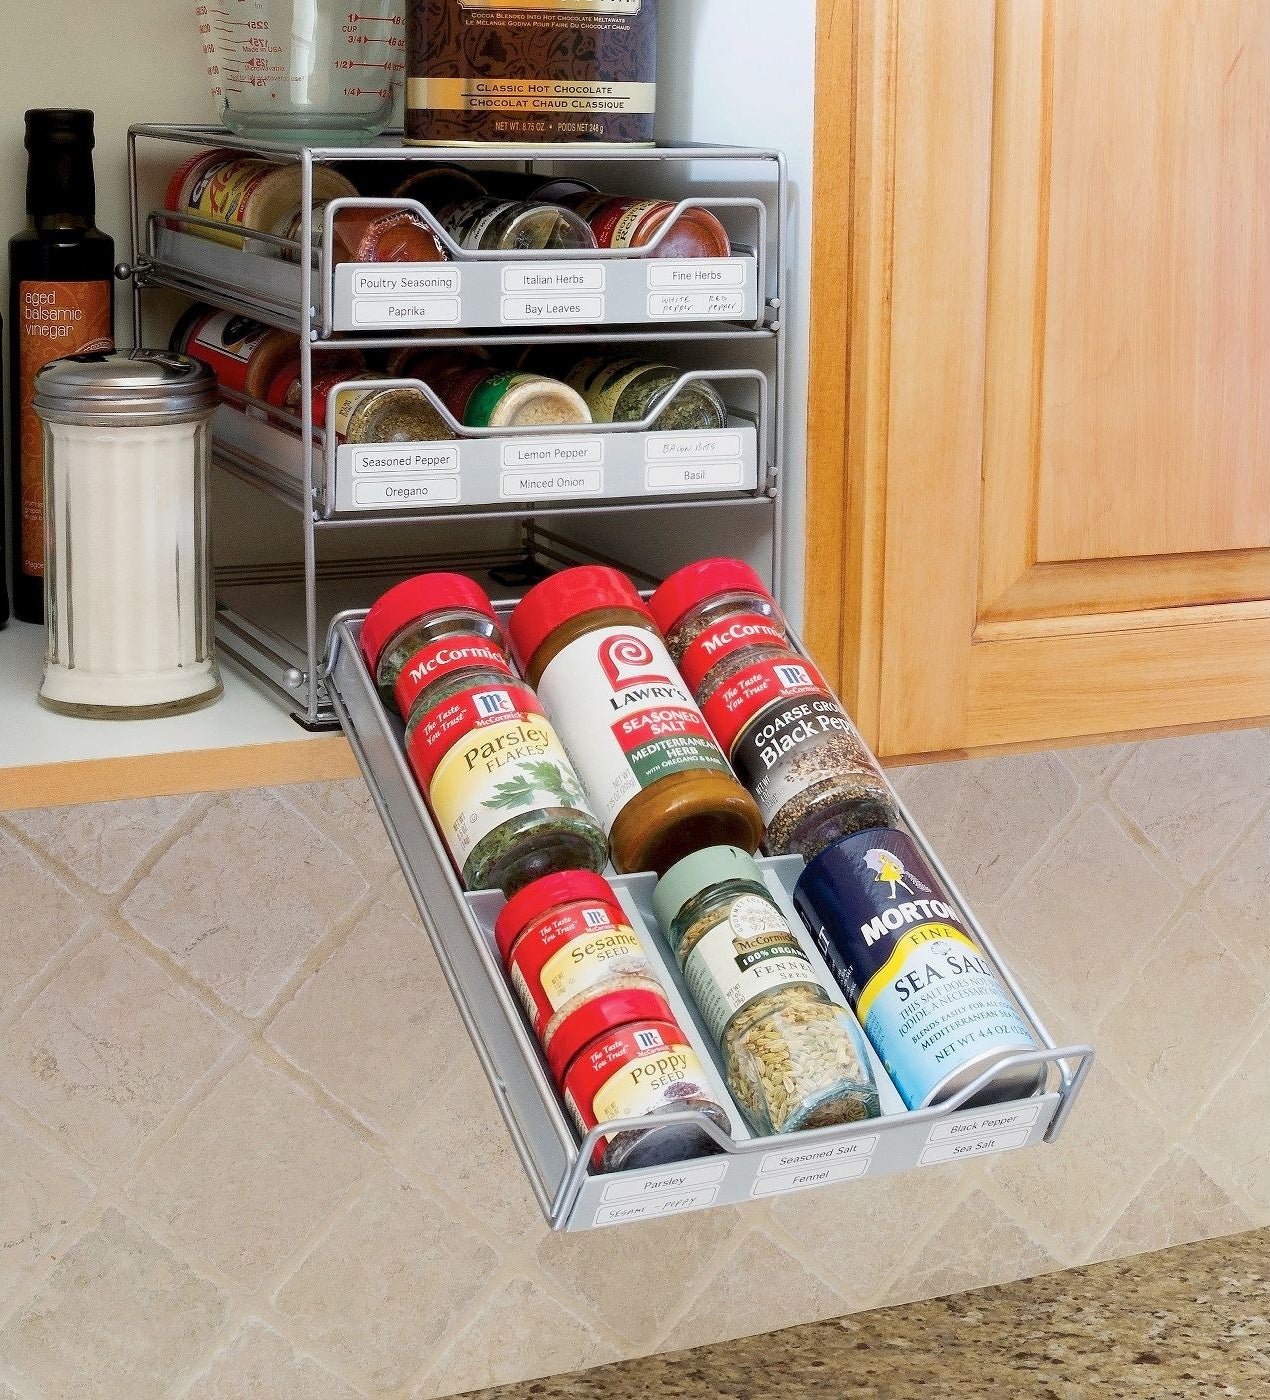 three-tier tilt down spice drawer filled with spice jars